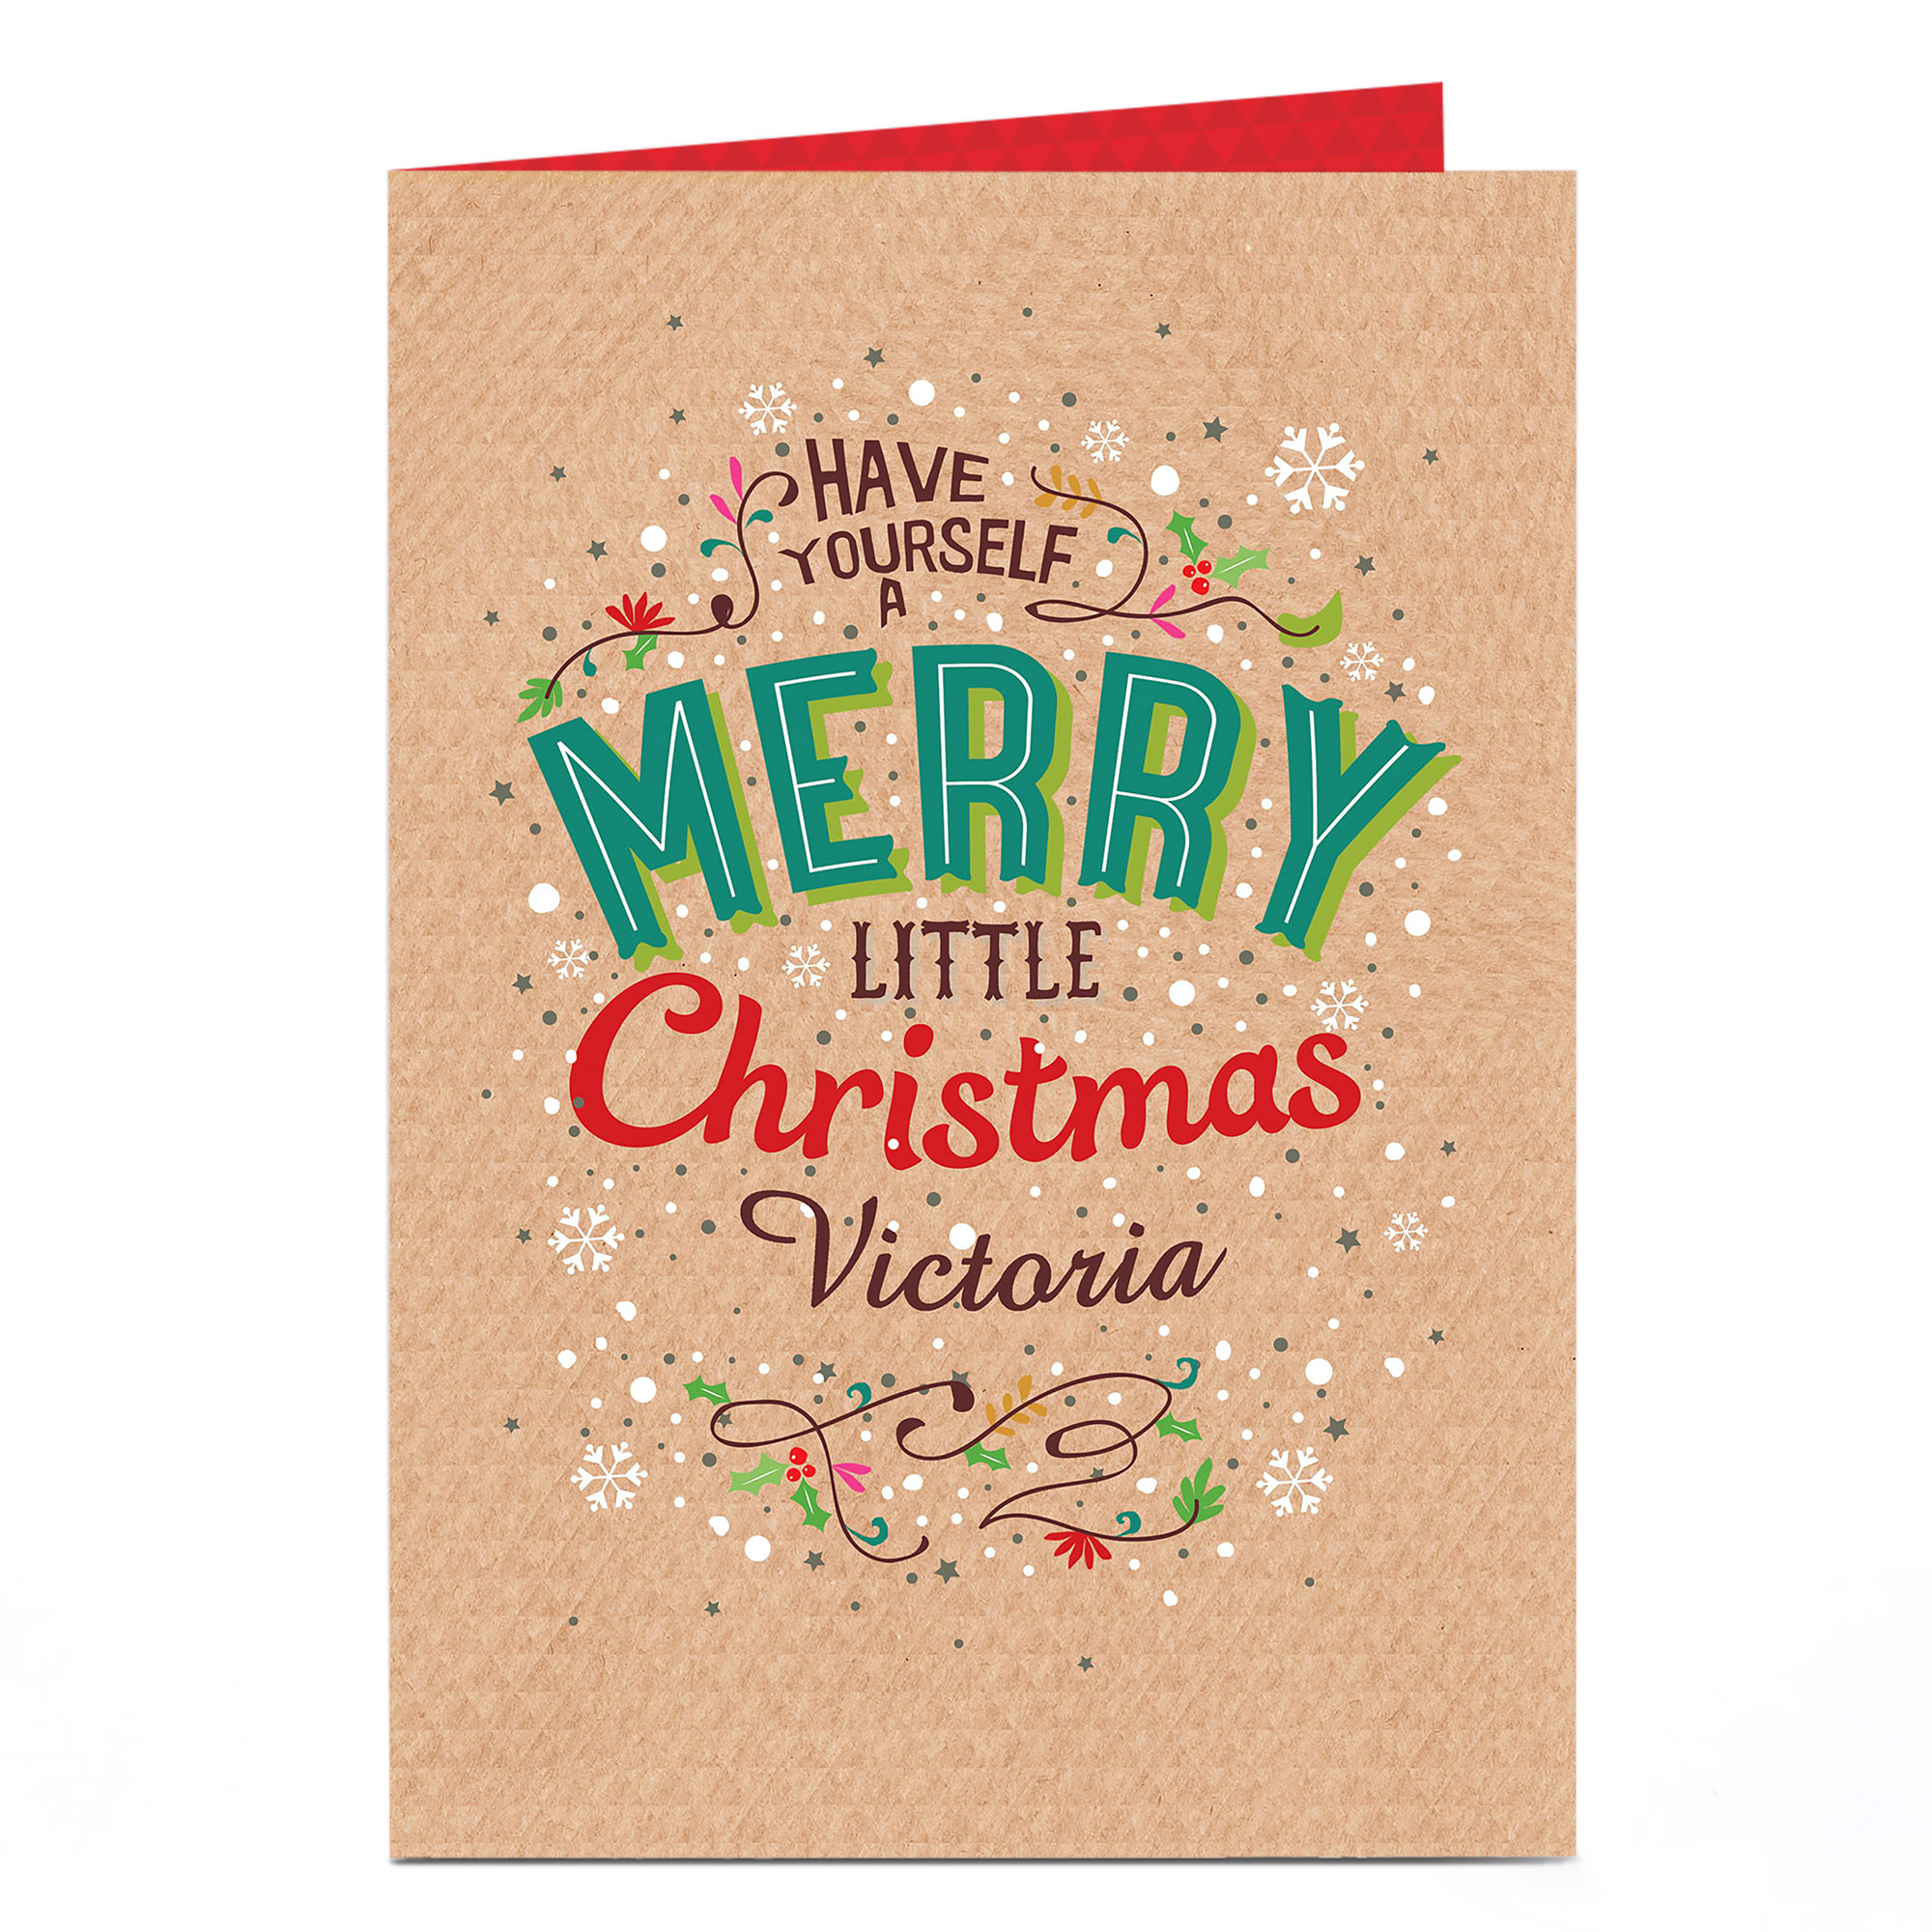 Personalised Christmas Card - Have Yourself A Merry Little Christmas